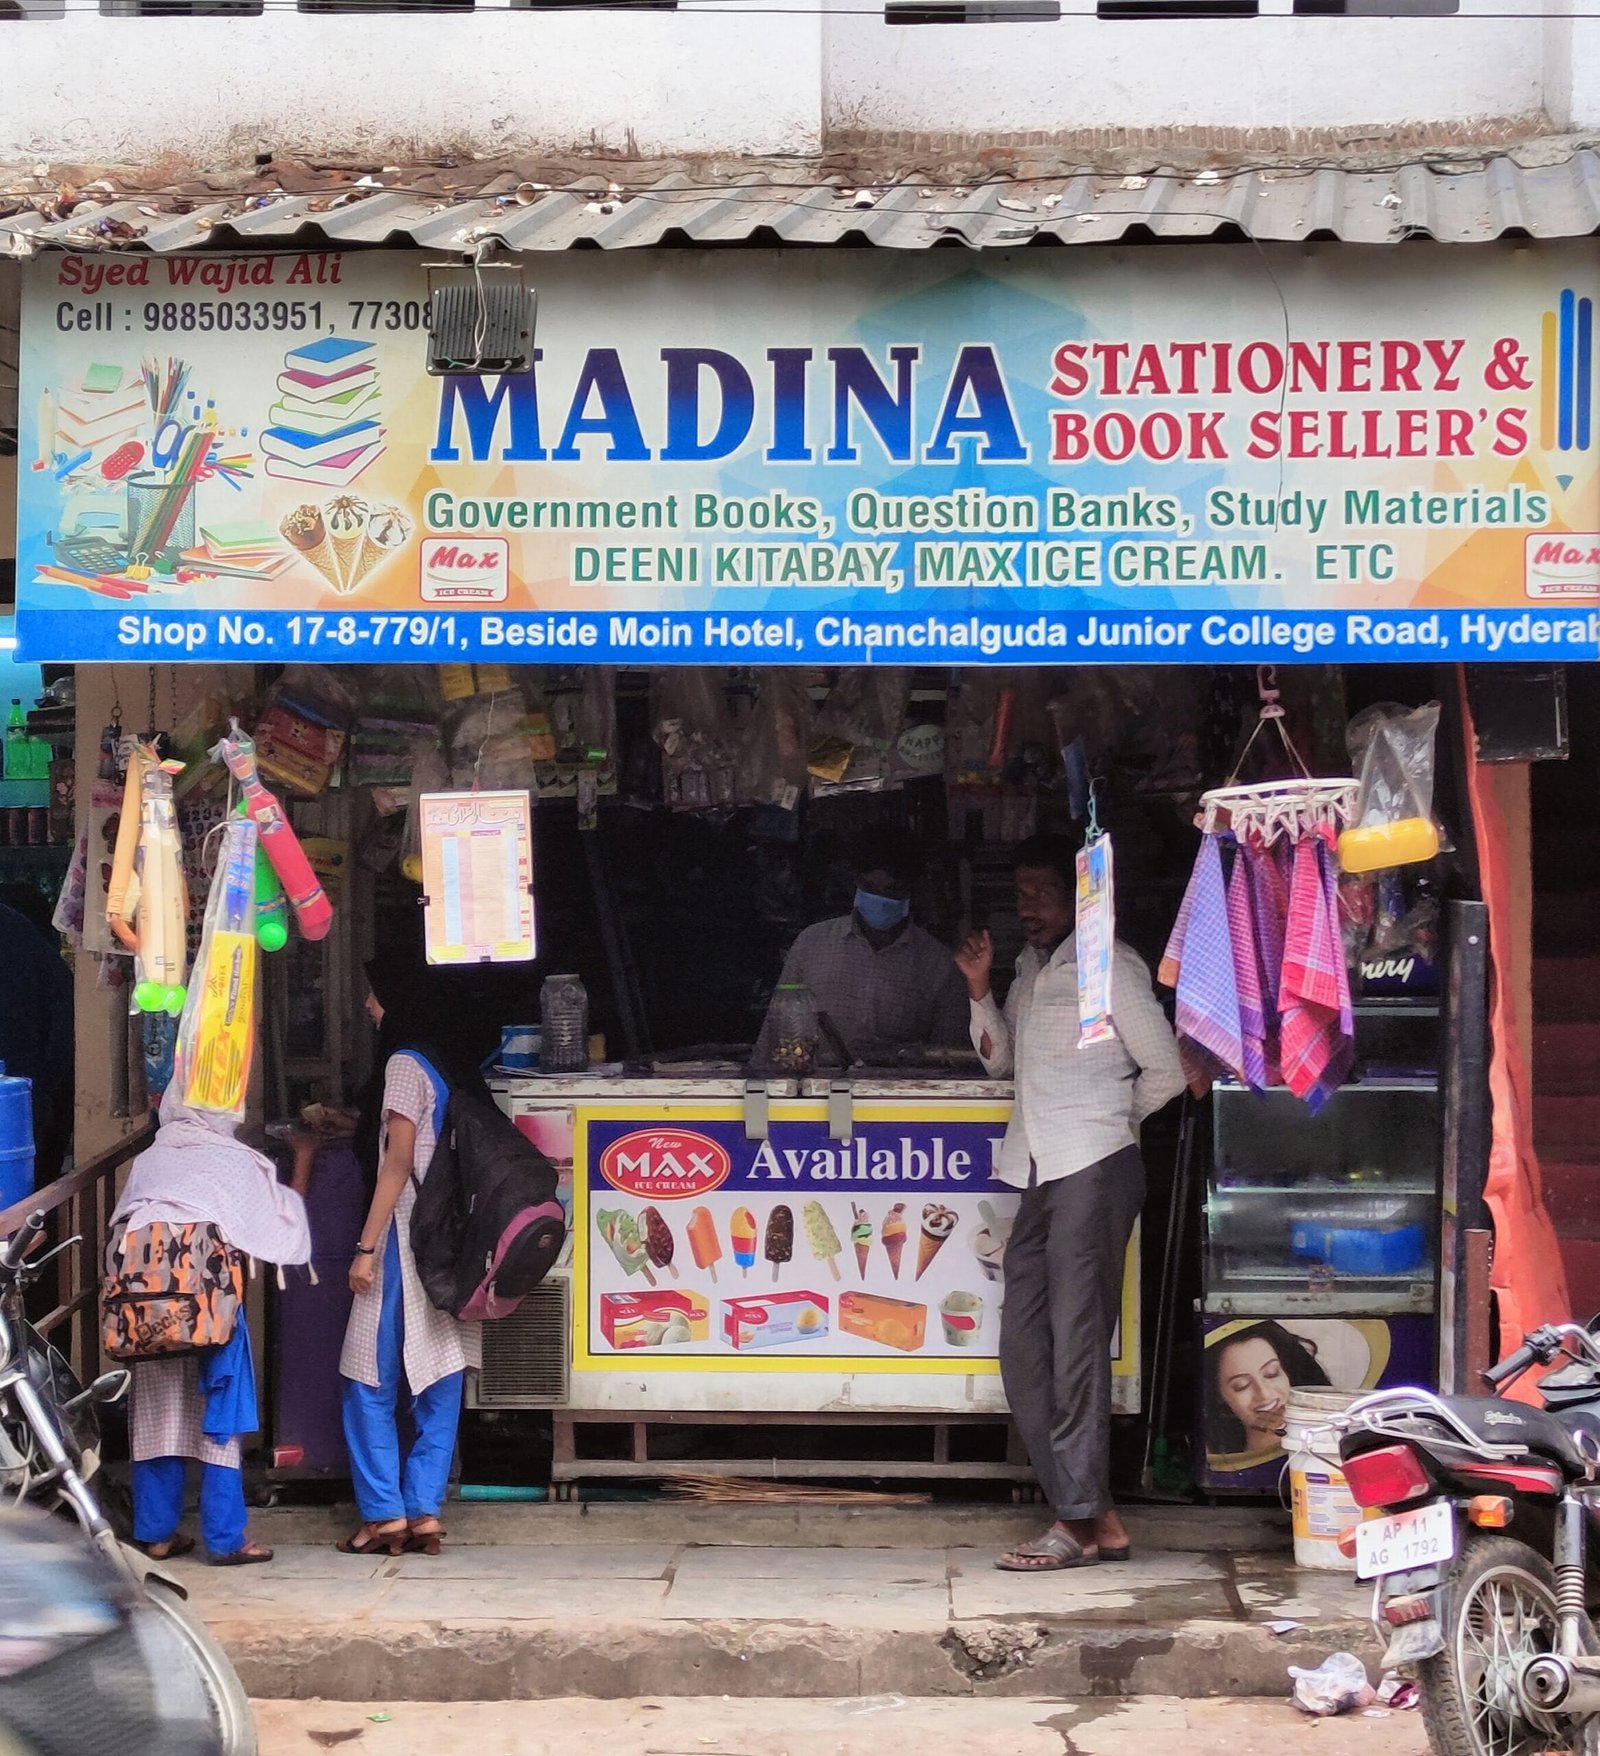 Madina stationary and book seller in Chanchalguda